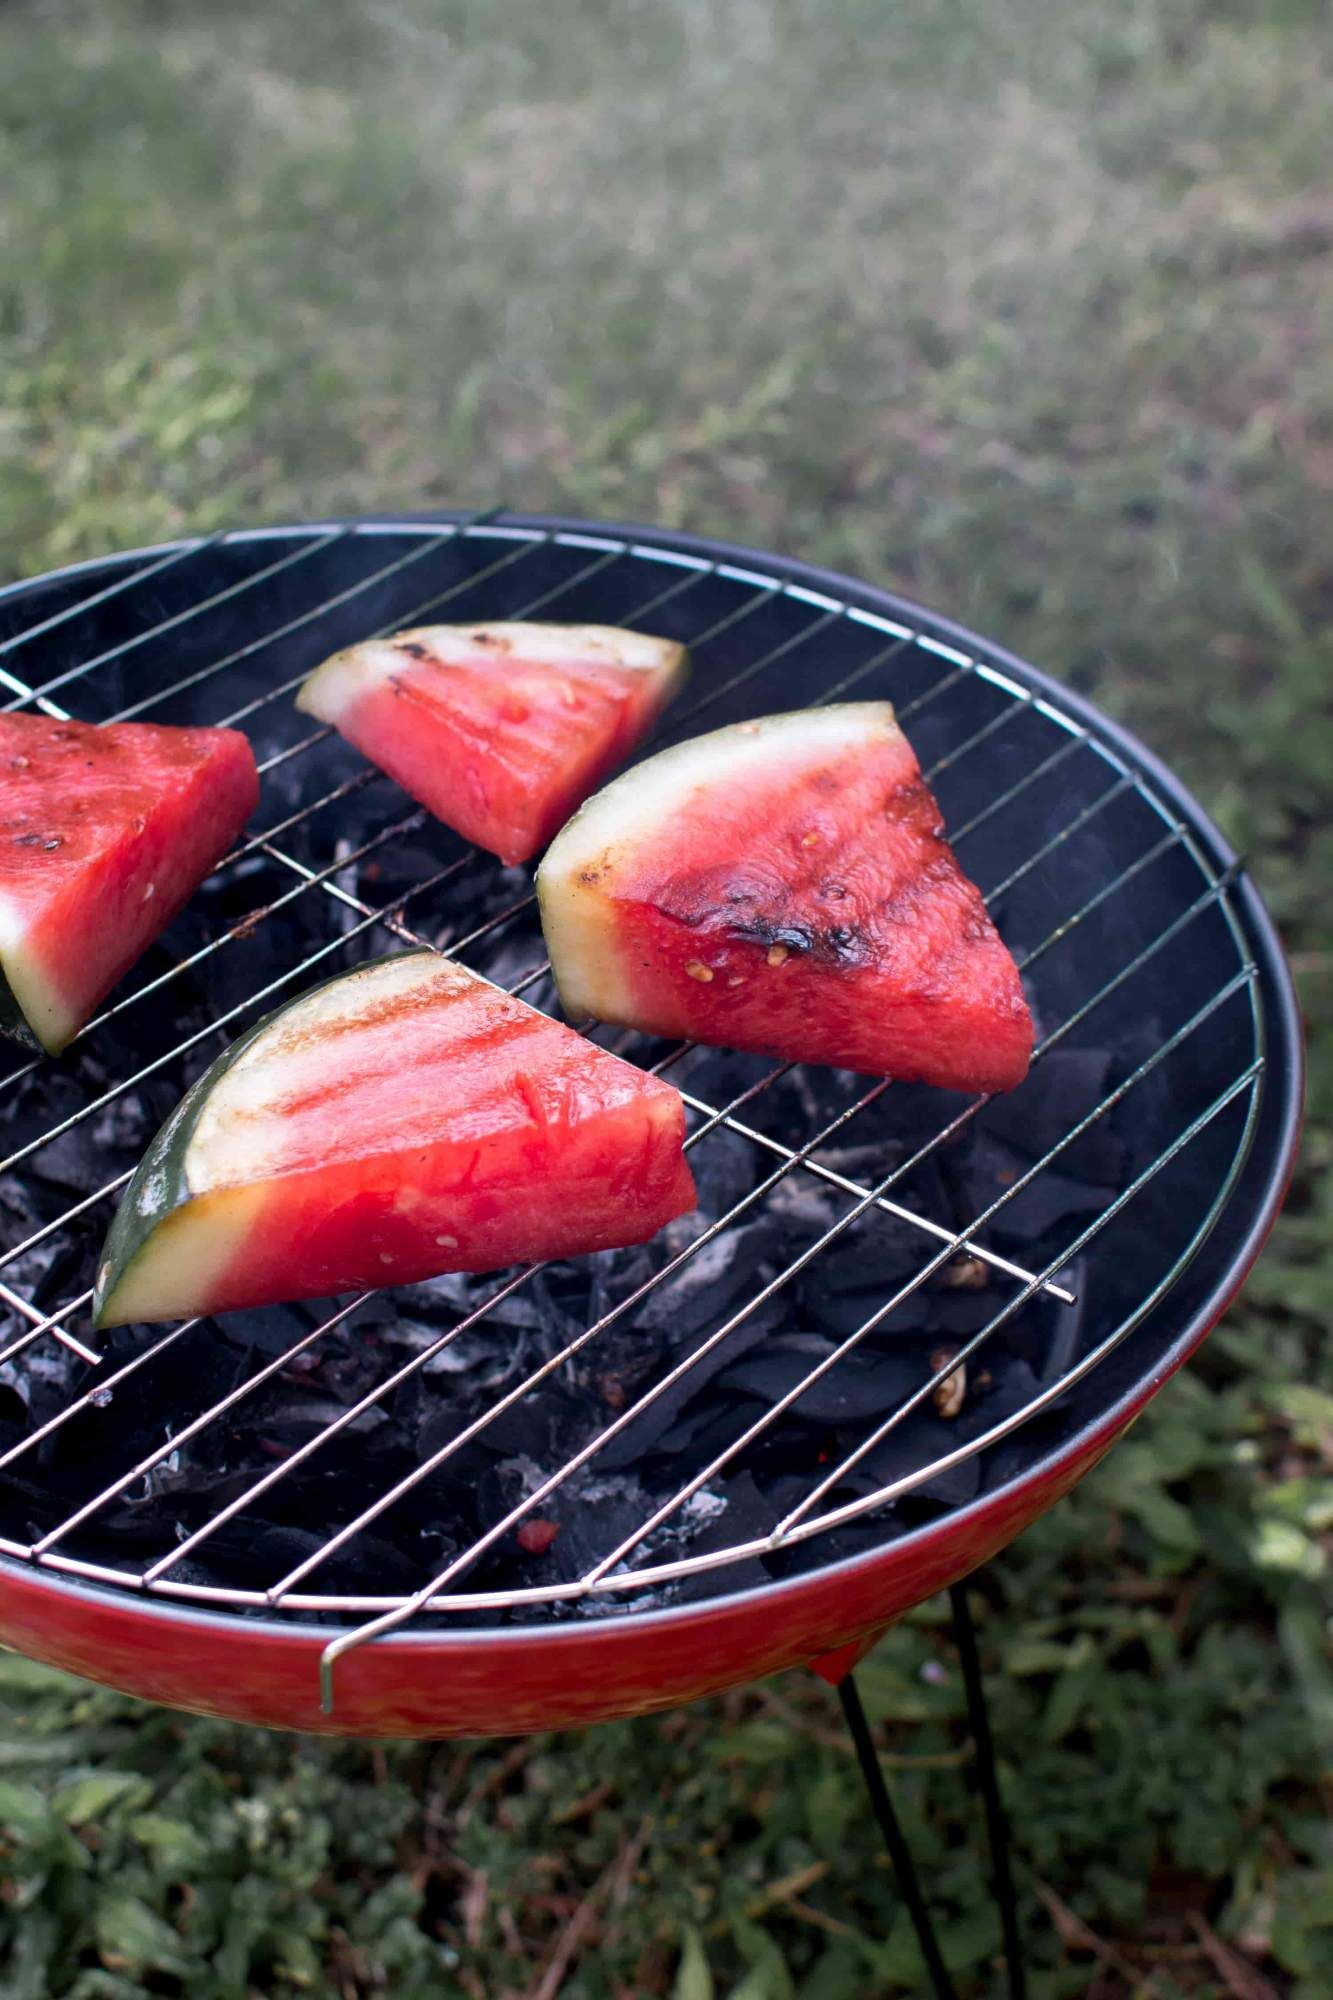 Watermelon on a charcaol grill with grill marks and smoke.